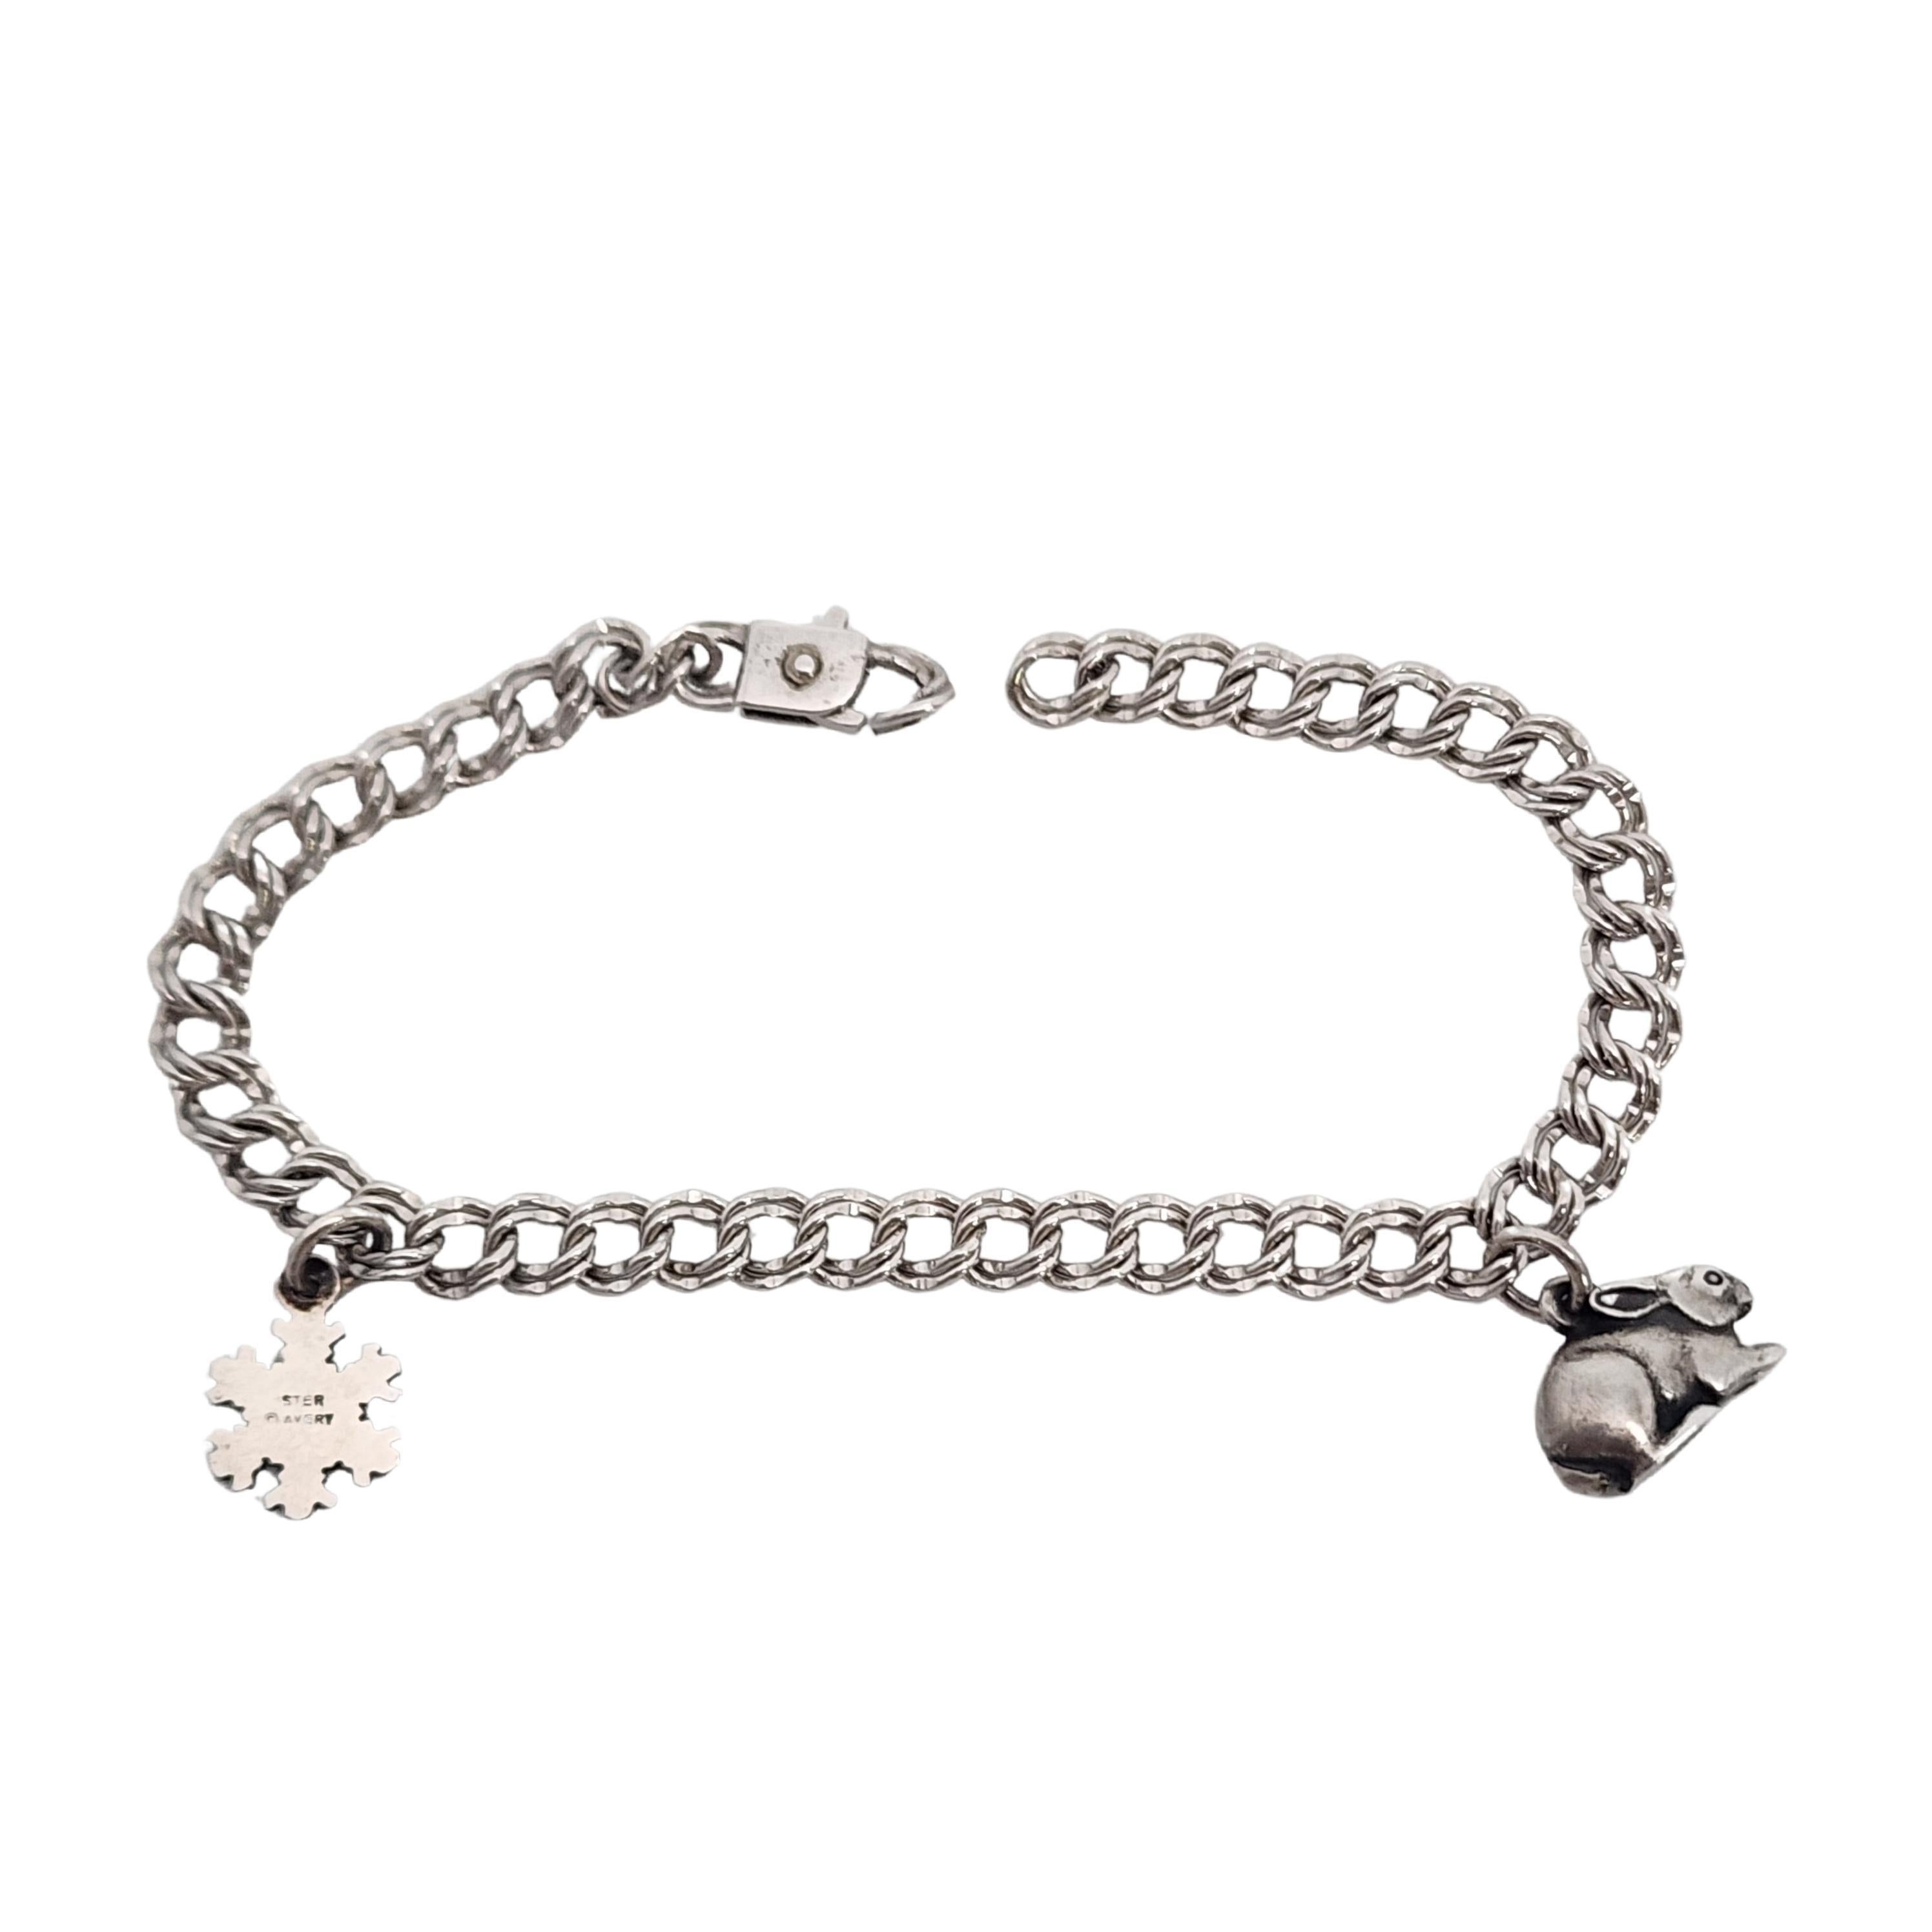 Sterling silver charm bracelet with rabbit and snowflake charms by James Avery.

Double round link bracelet with James Avery's Cottontail bunny rabbit charm and Aspen Crystal snowflake charms.

Bracelet measures approx 7